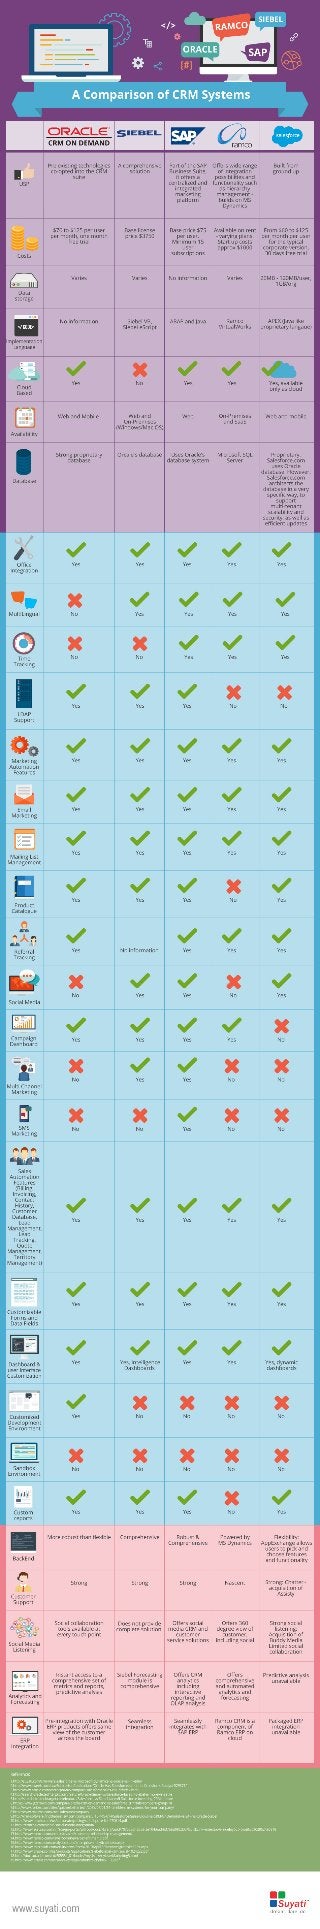 Top CRM Systems Compared